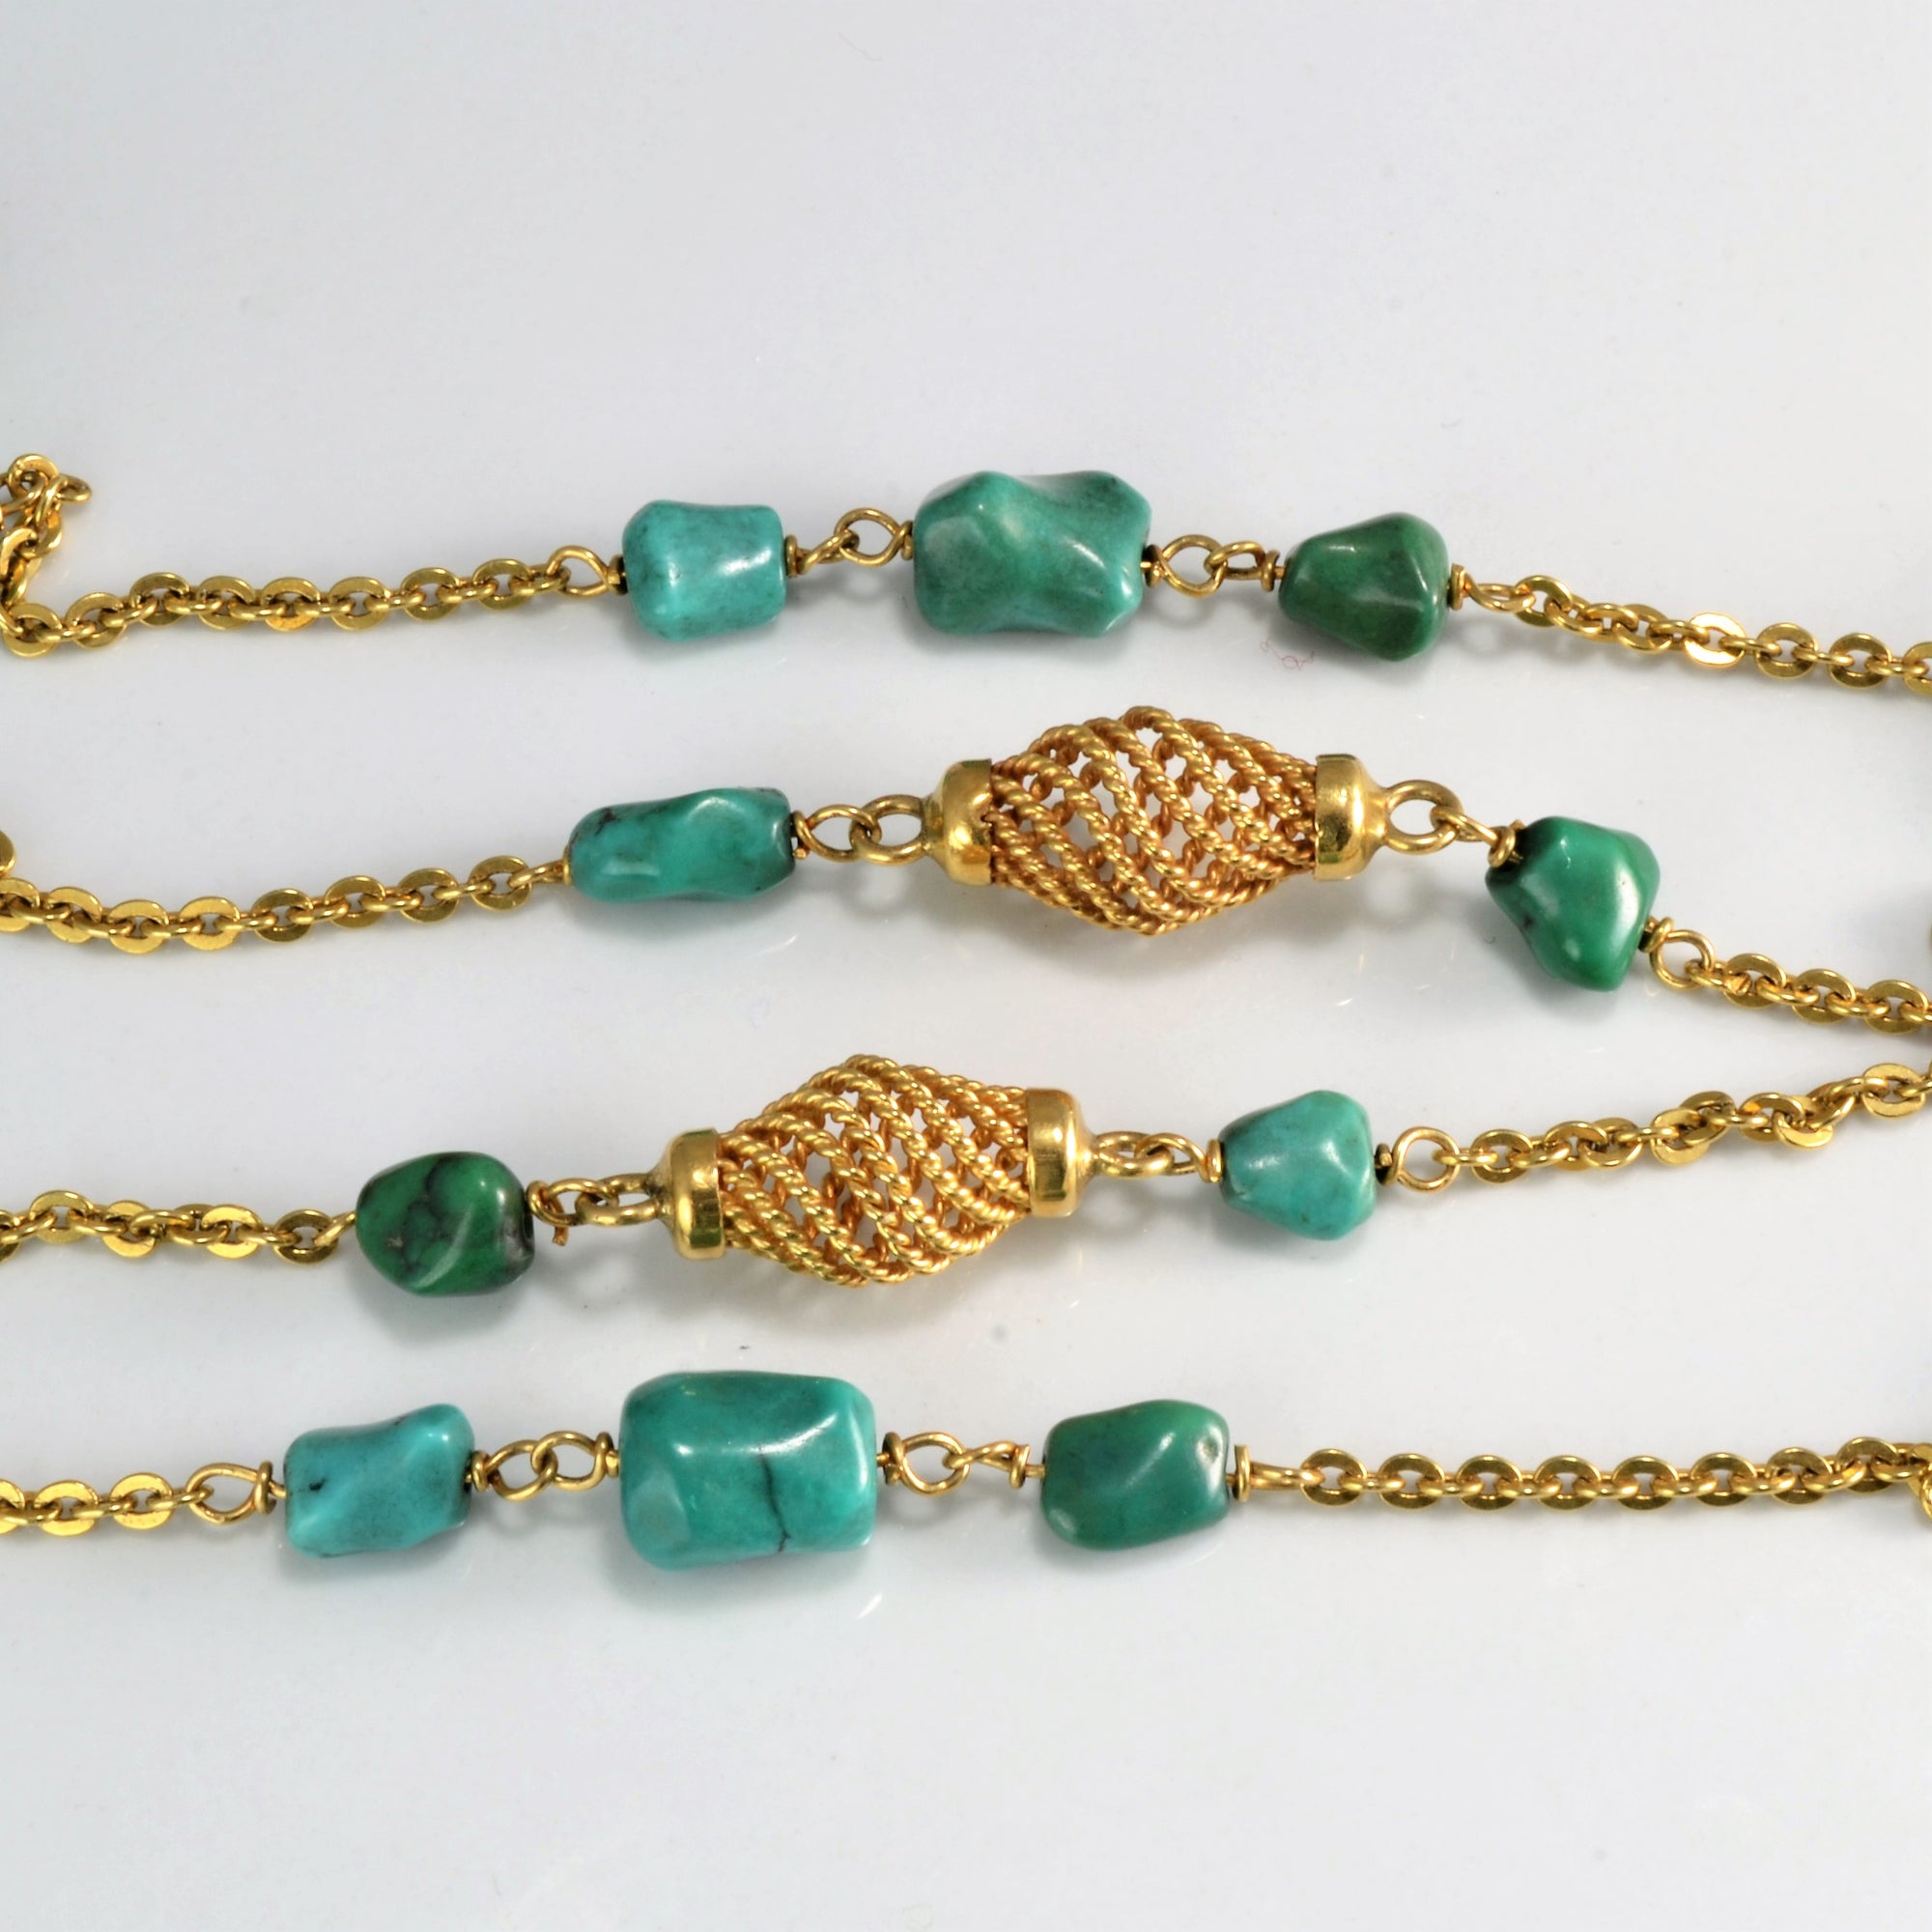 Fancy Filigree Pattern Turquoise Long Chain Necklace | 38''|